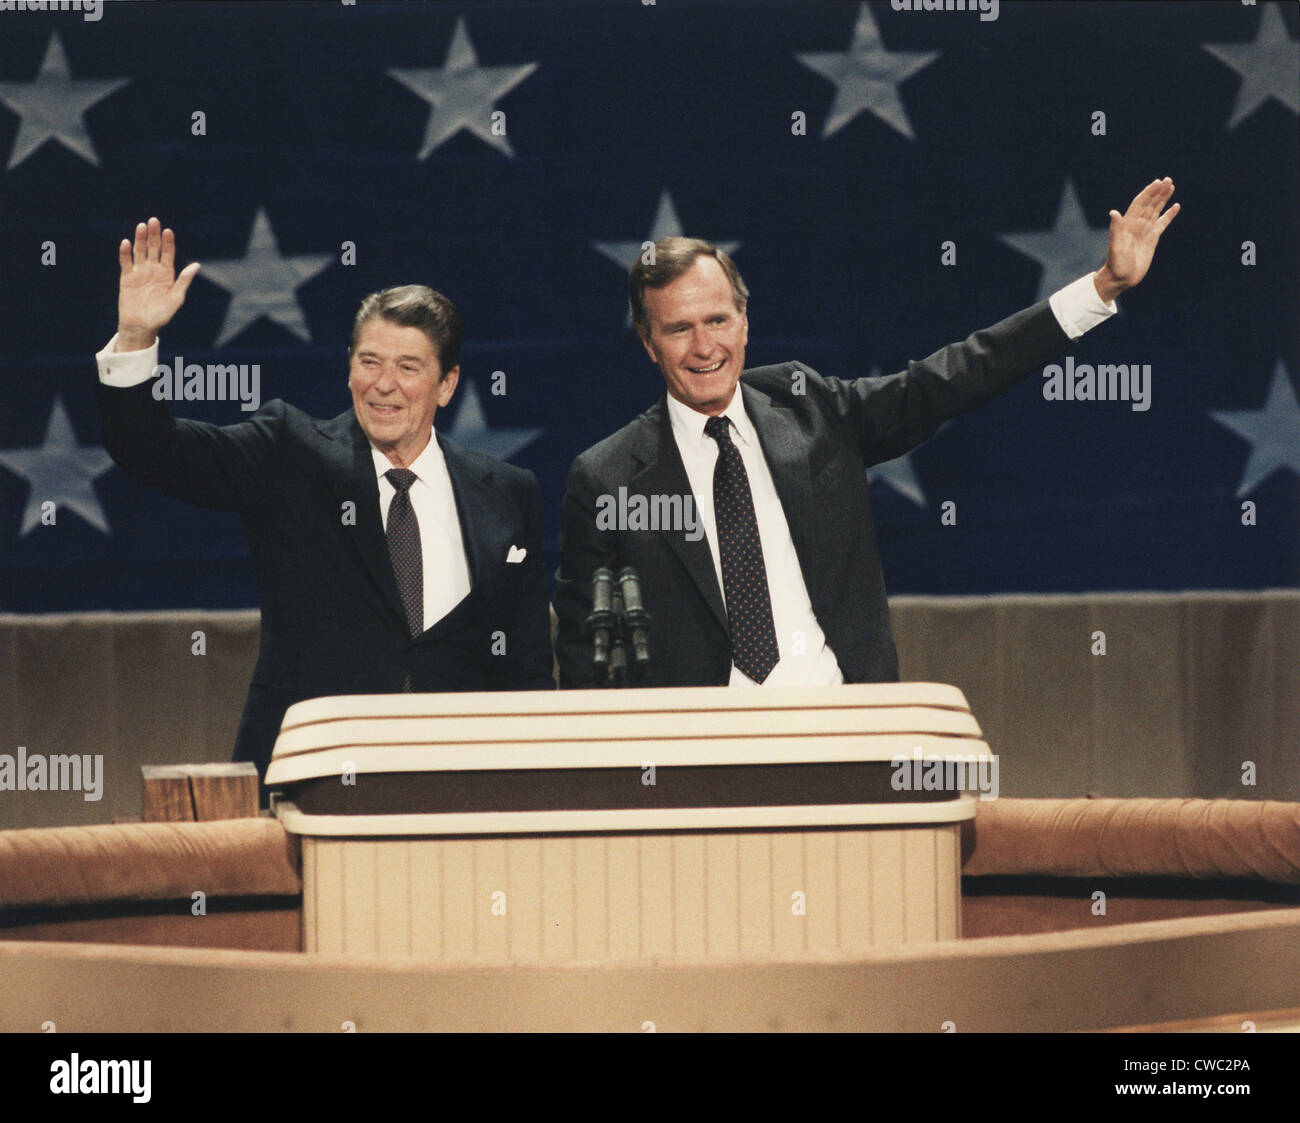 President Reagan and Vice-President Bush at the Republican National Convention Dallas Texas. Aug. 23 1984. (BSLOC 2011 2 11) Stock Photo